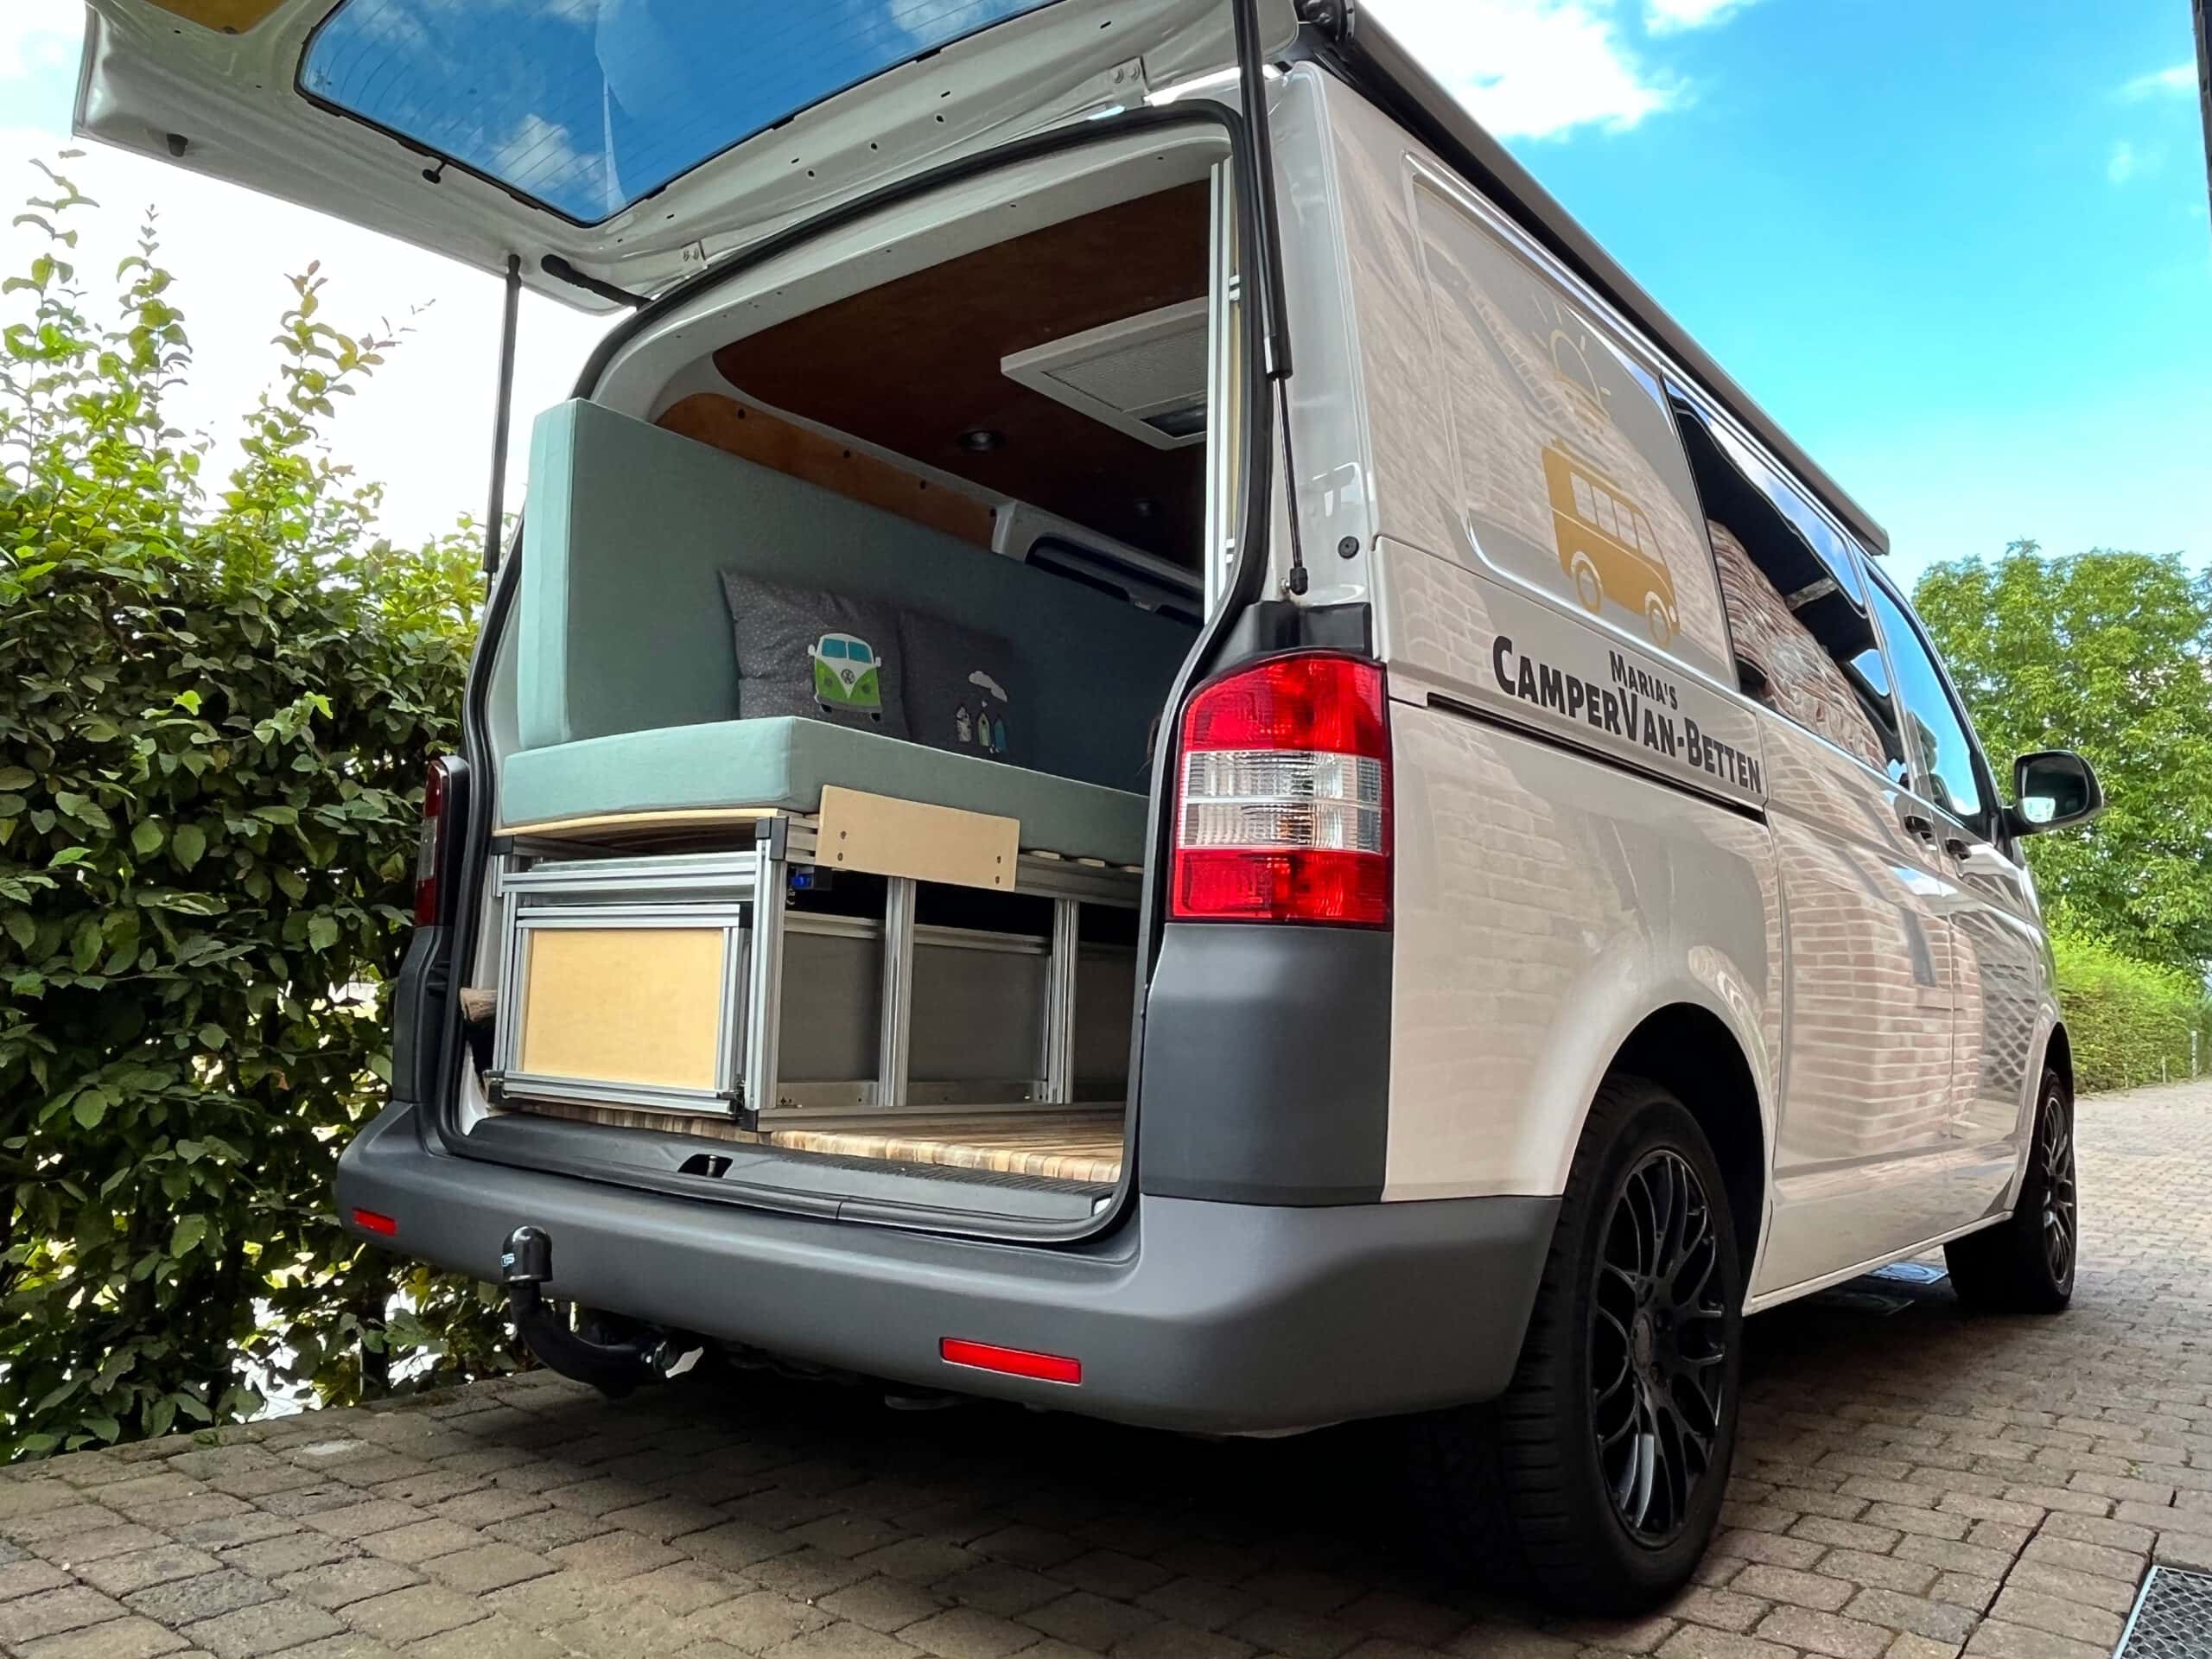 Sleep well and win - with Maria's CamperVan beds